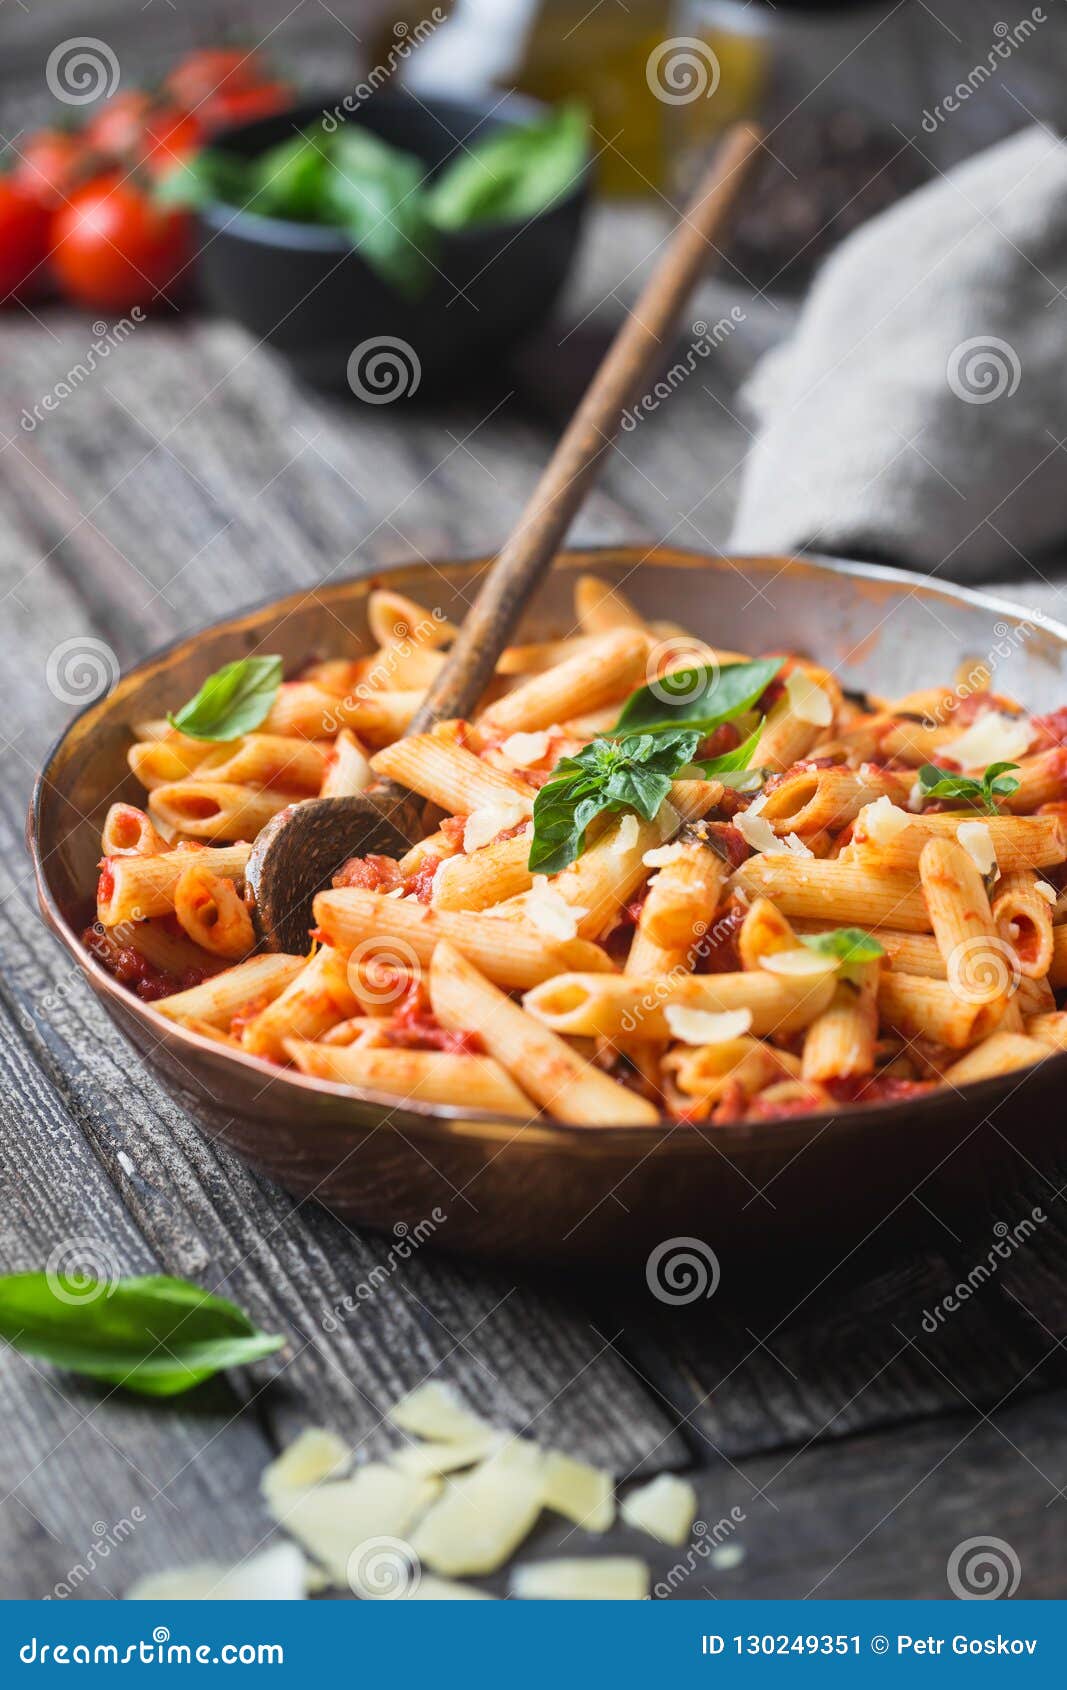 Penne Pasta in Tomato Sauce Stock Image - Image of meal, dinner: 130249351